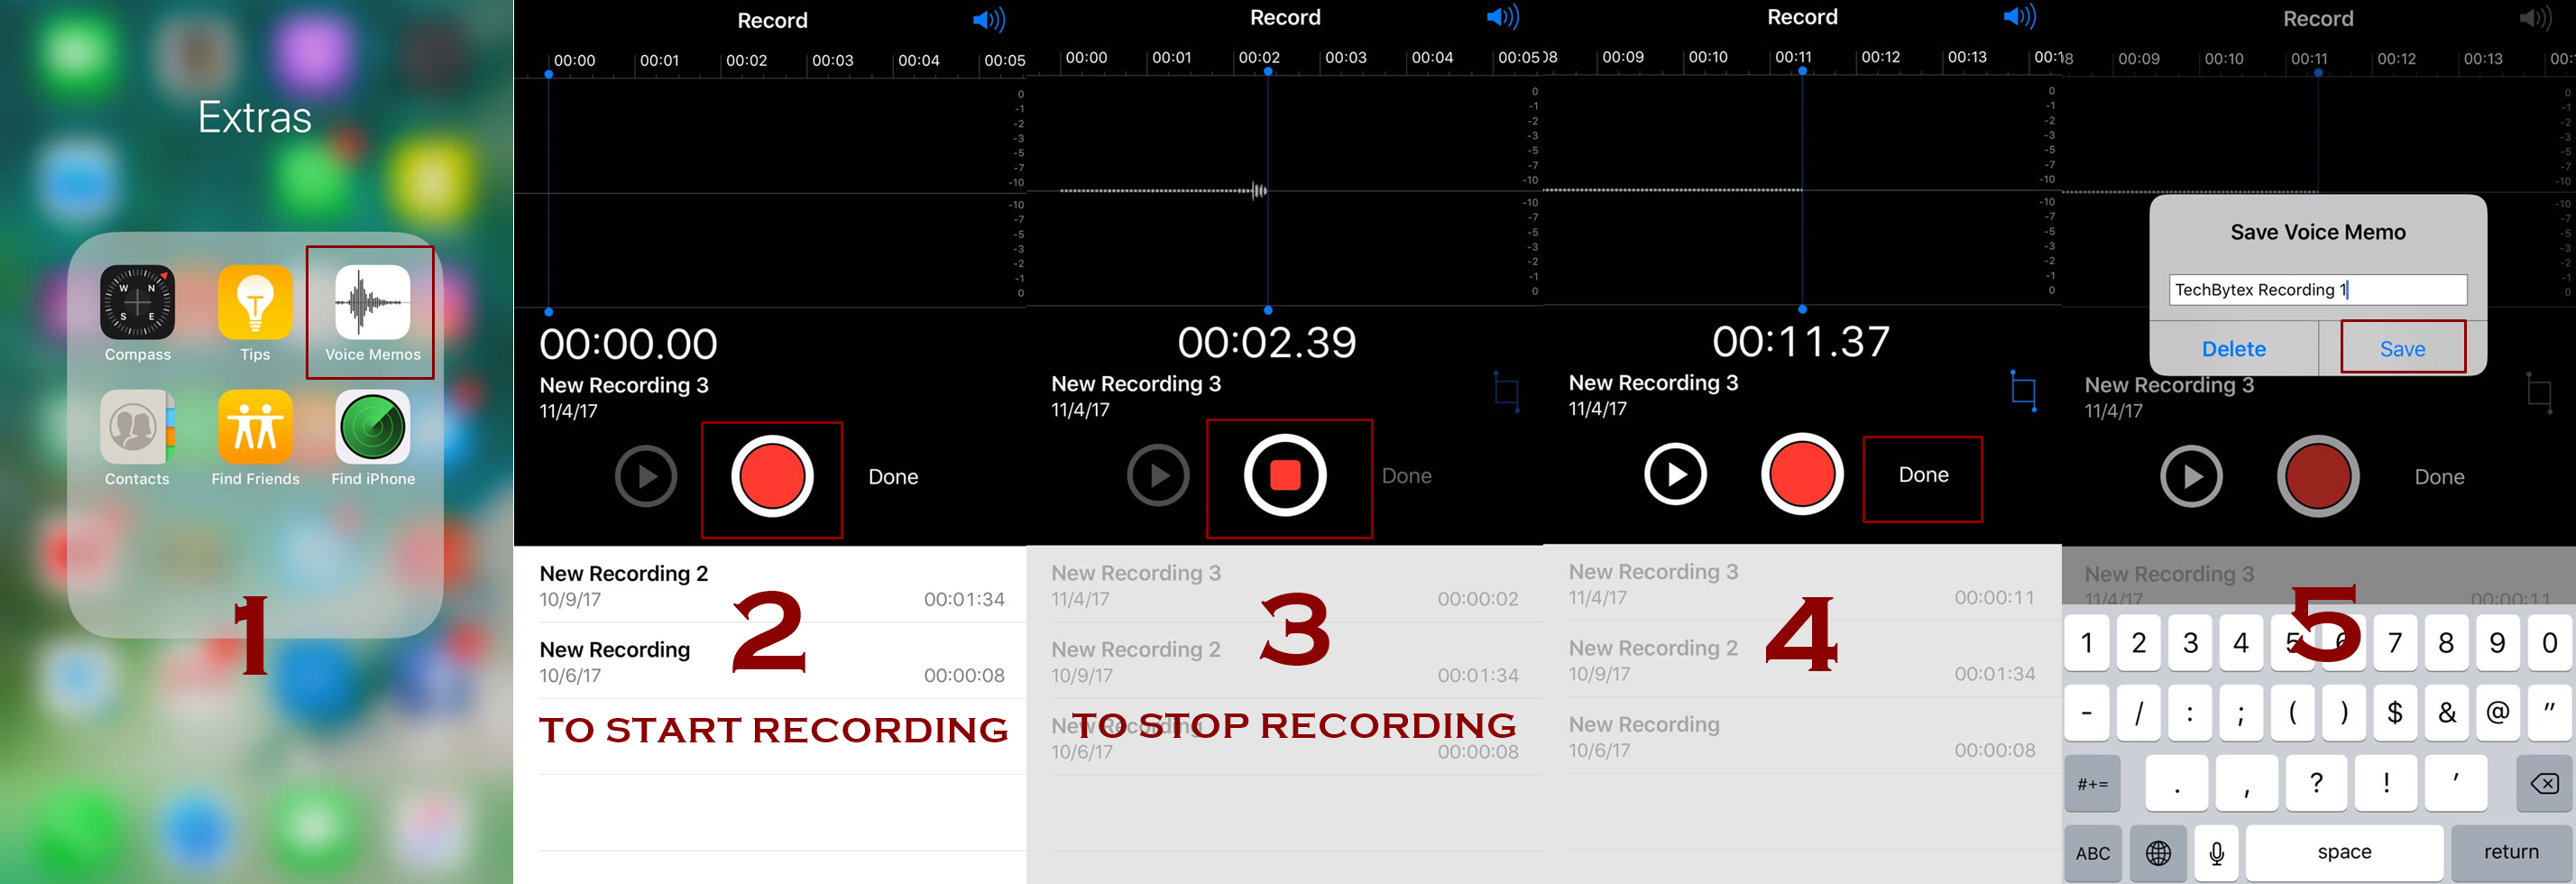 How to use and record voice memos in iPhone | Techbytex